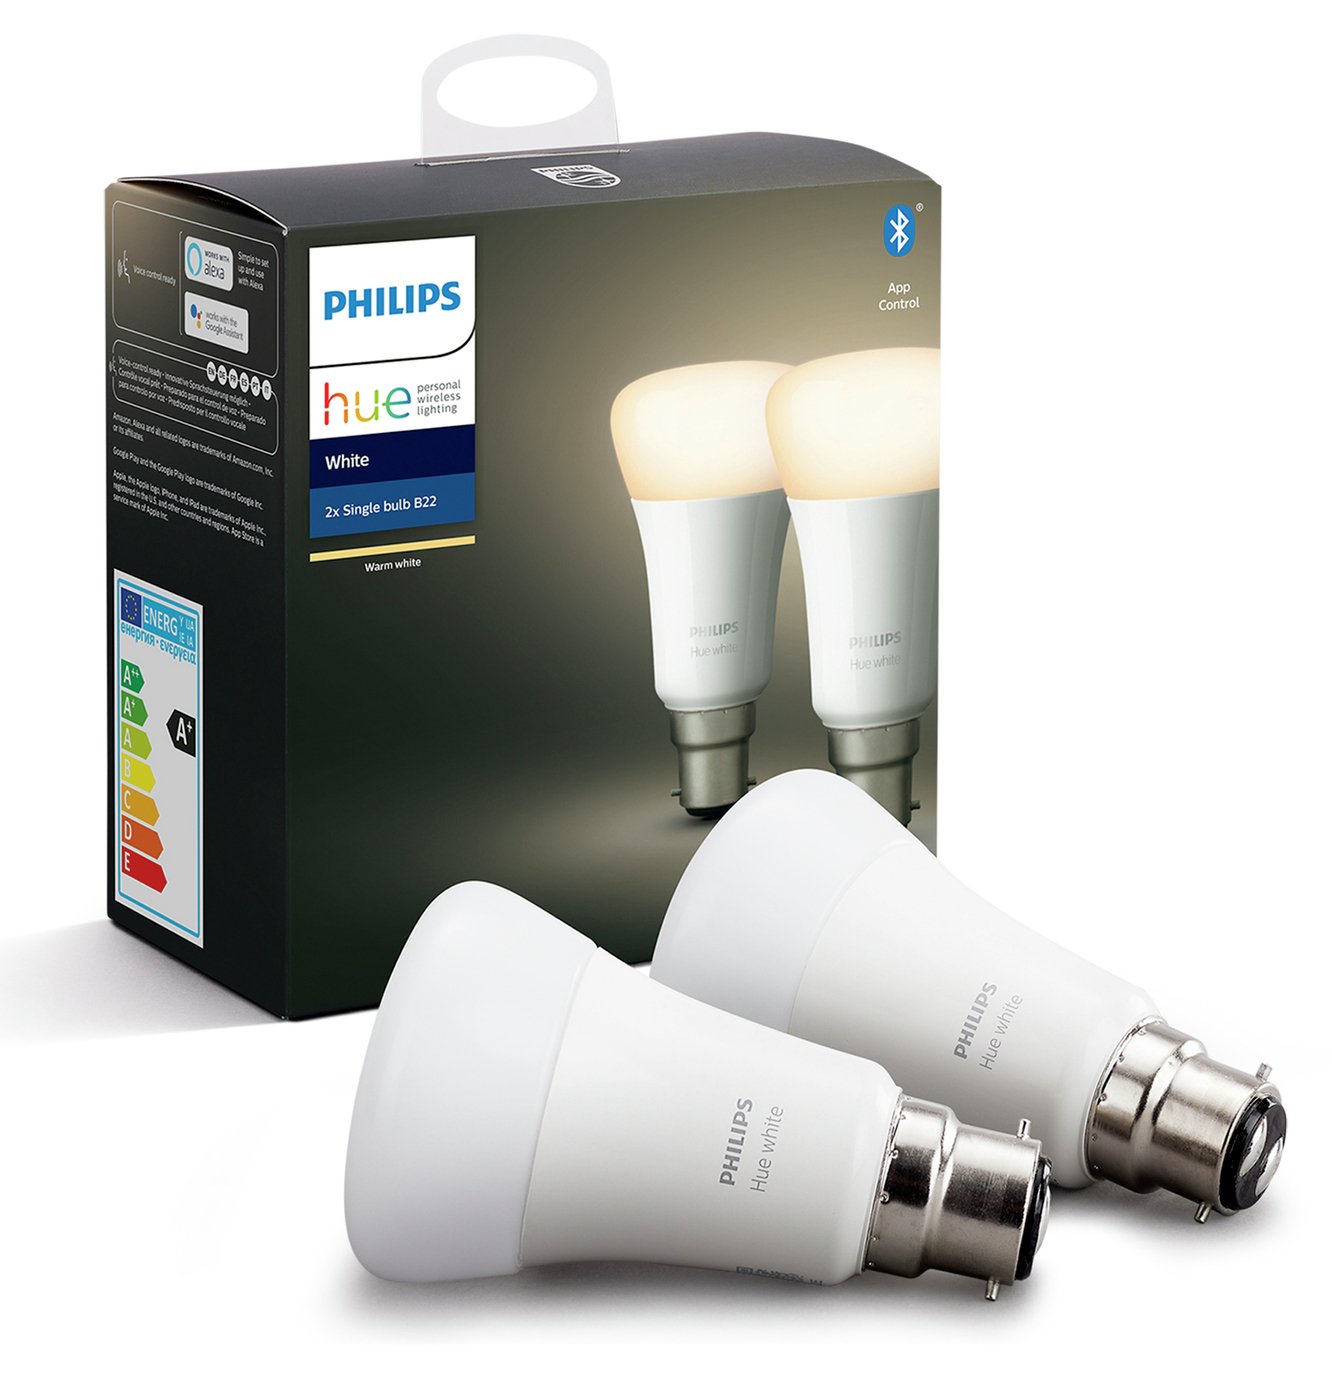 Philips Hue B22 White Smart Bulb with Bluetooth - 2 Pack